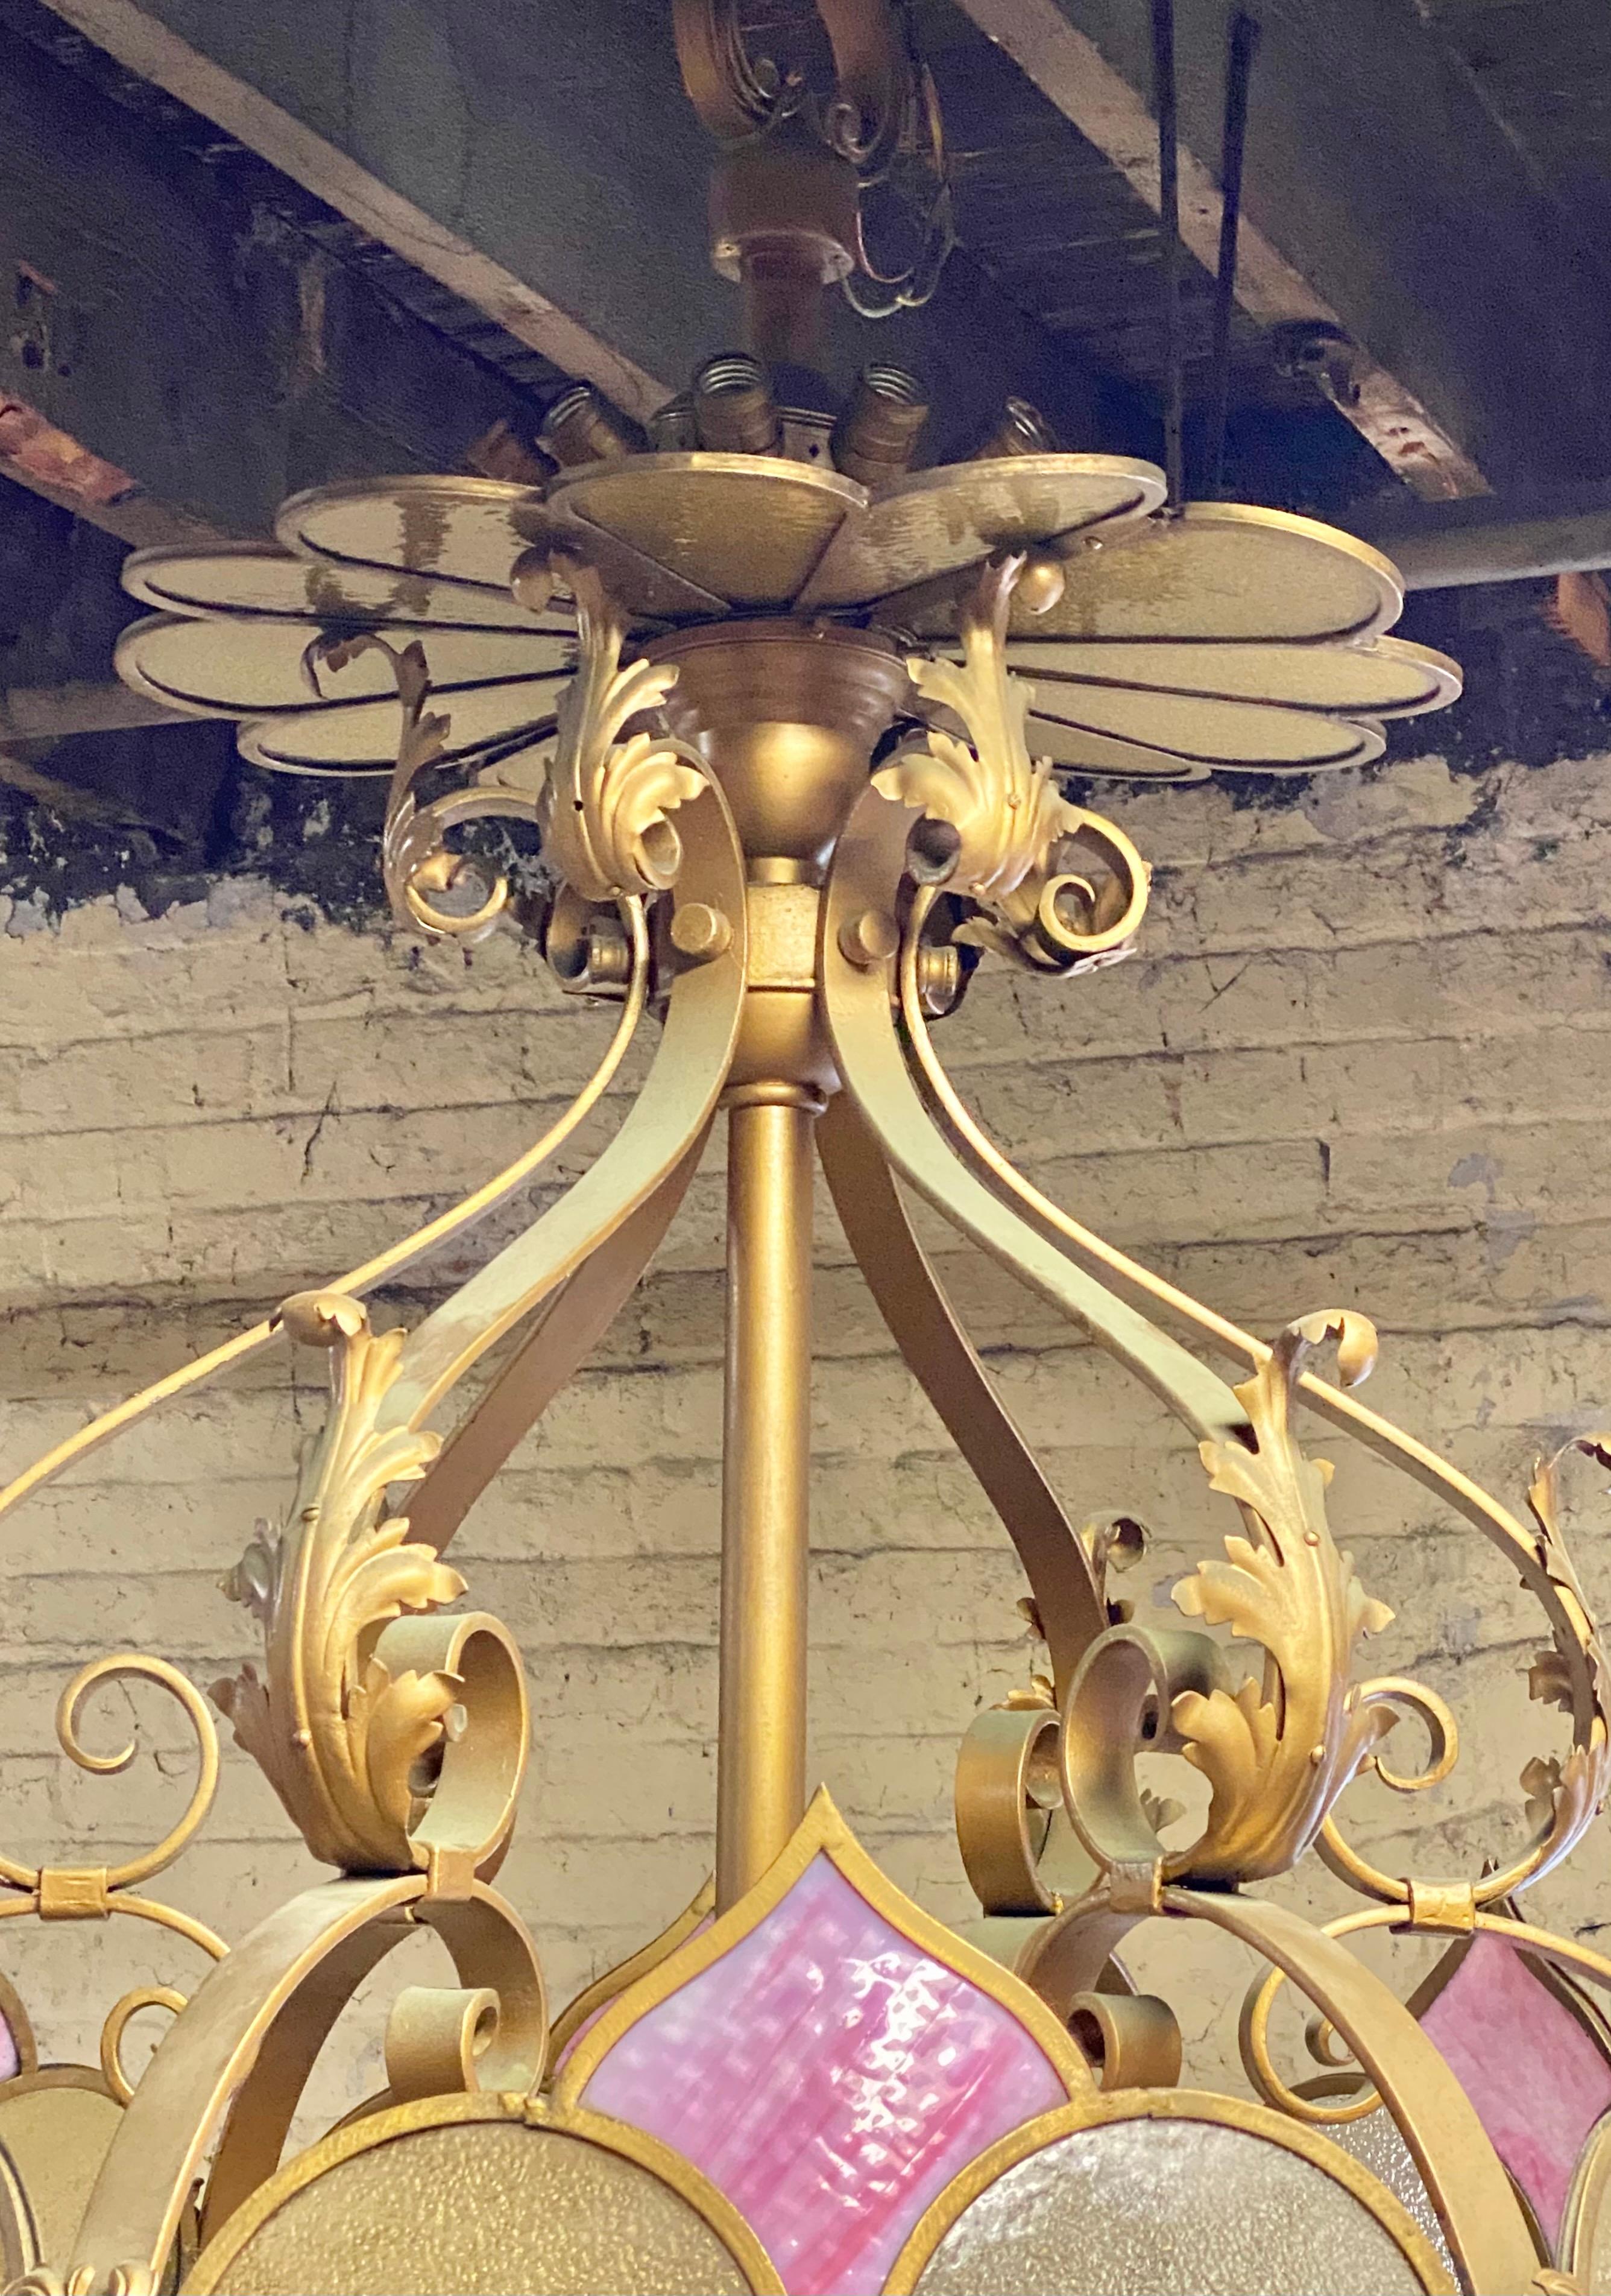 Monumental oversized ...glass and iron deco/ Victorian fantasy chandelier / pendant lighting, Salvaged from theater, outrageous fantasy chandelier, featuring decorative gilt iron frame, slag glass, stain glass, minor cracks to a couple of small